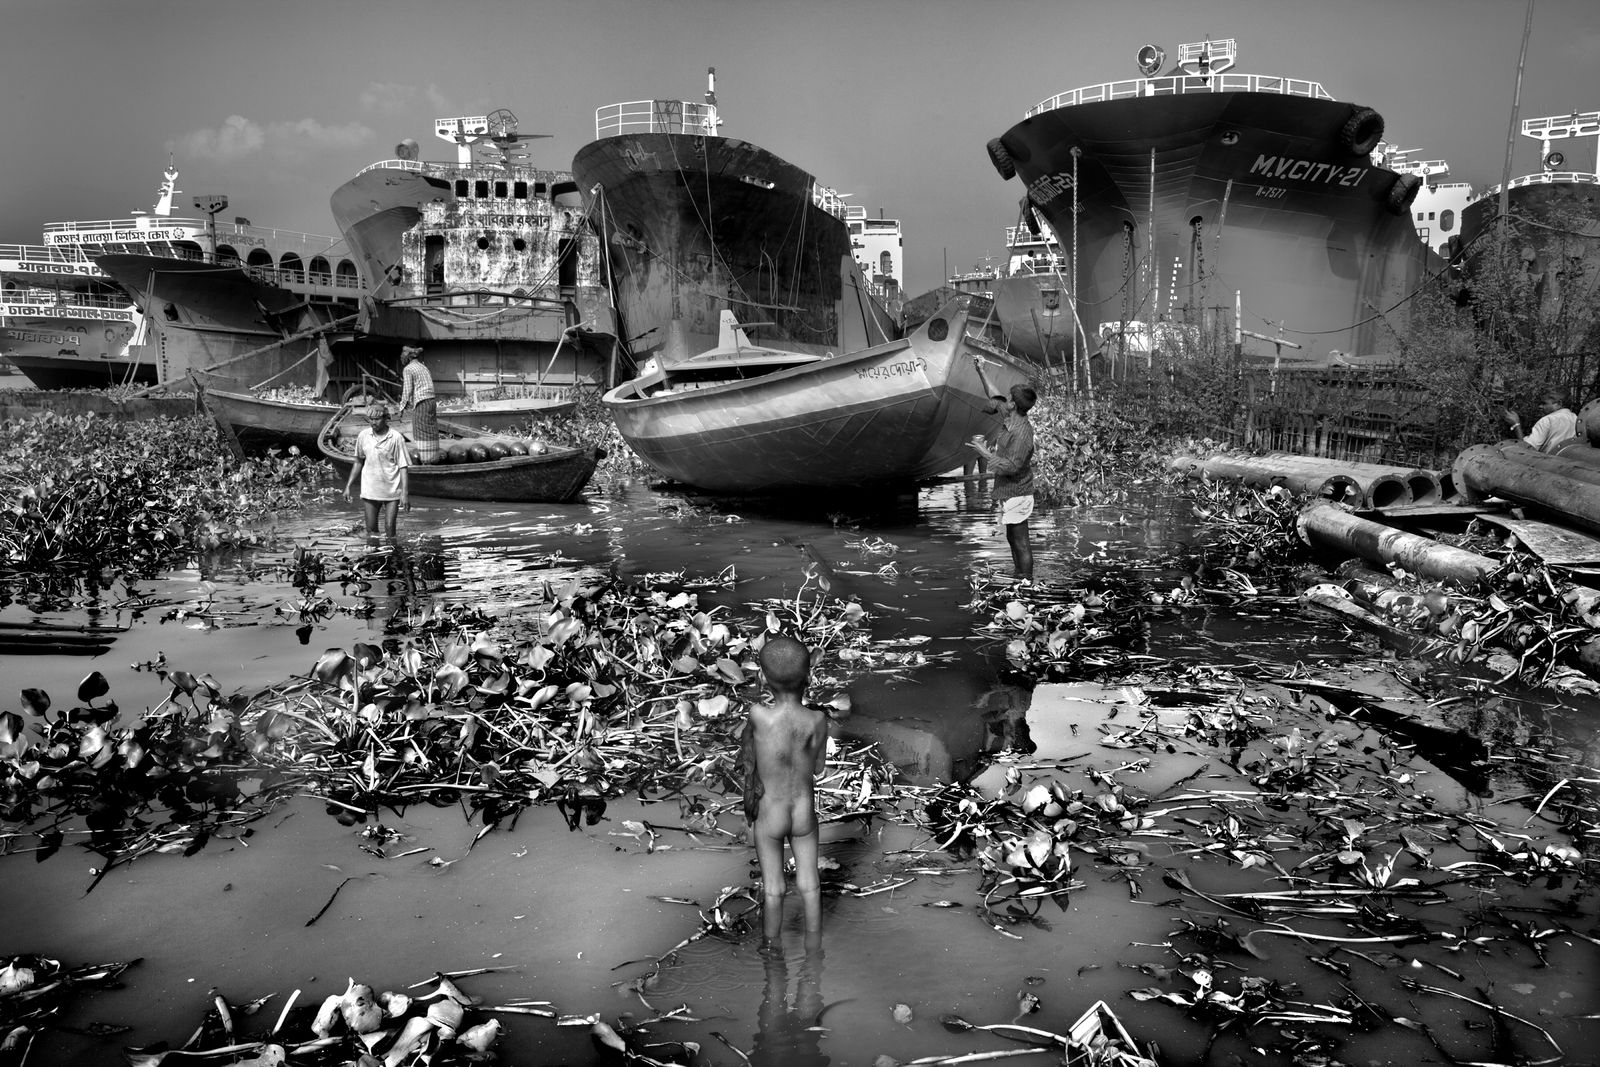 © Larry Louie - Image from the Ship Breaking - The World's Most Dangerous Job photography project